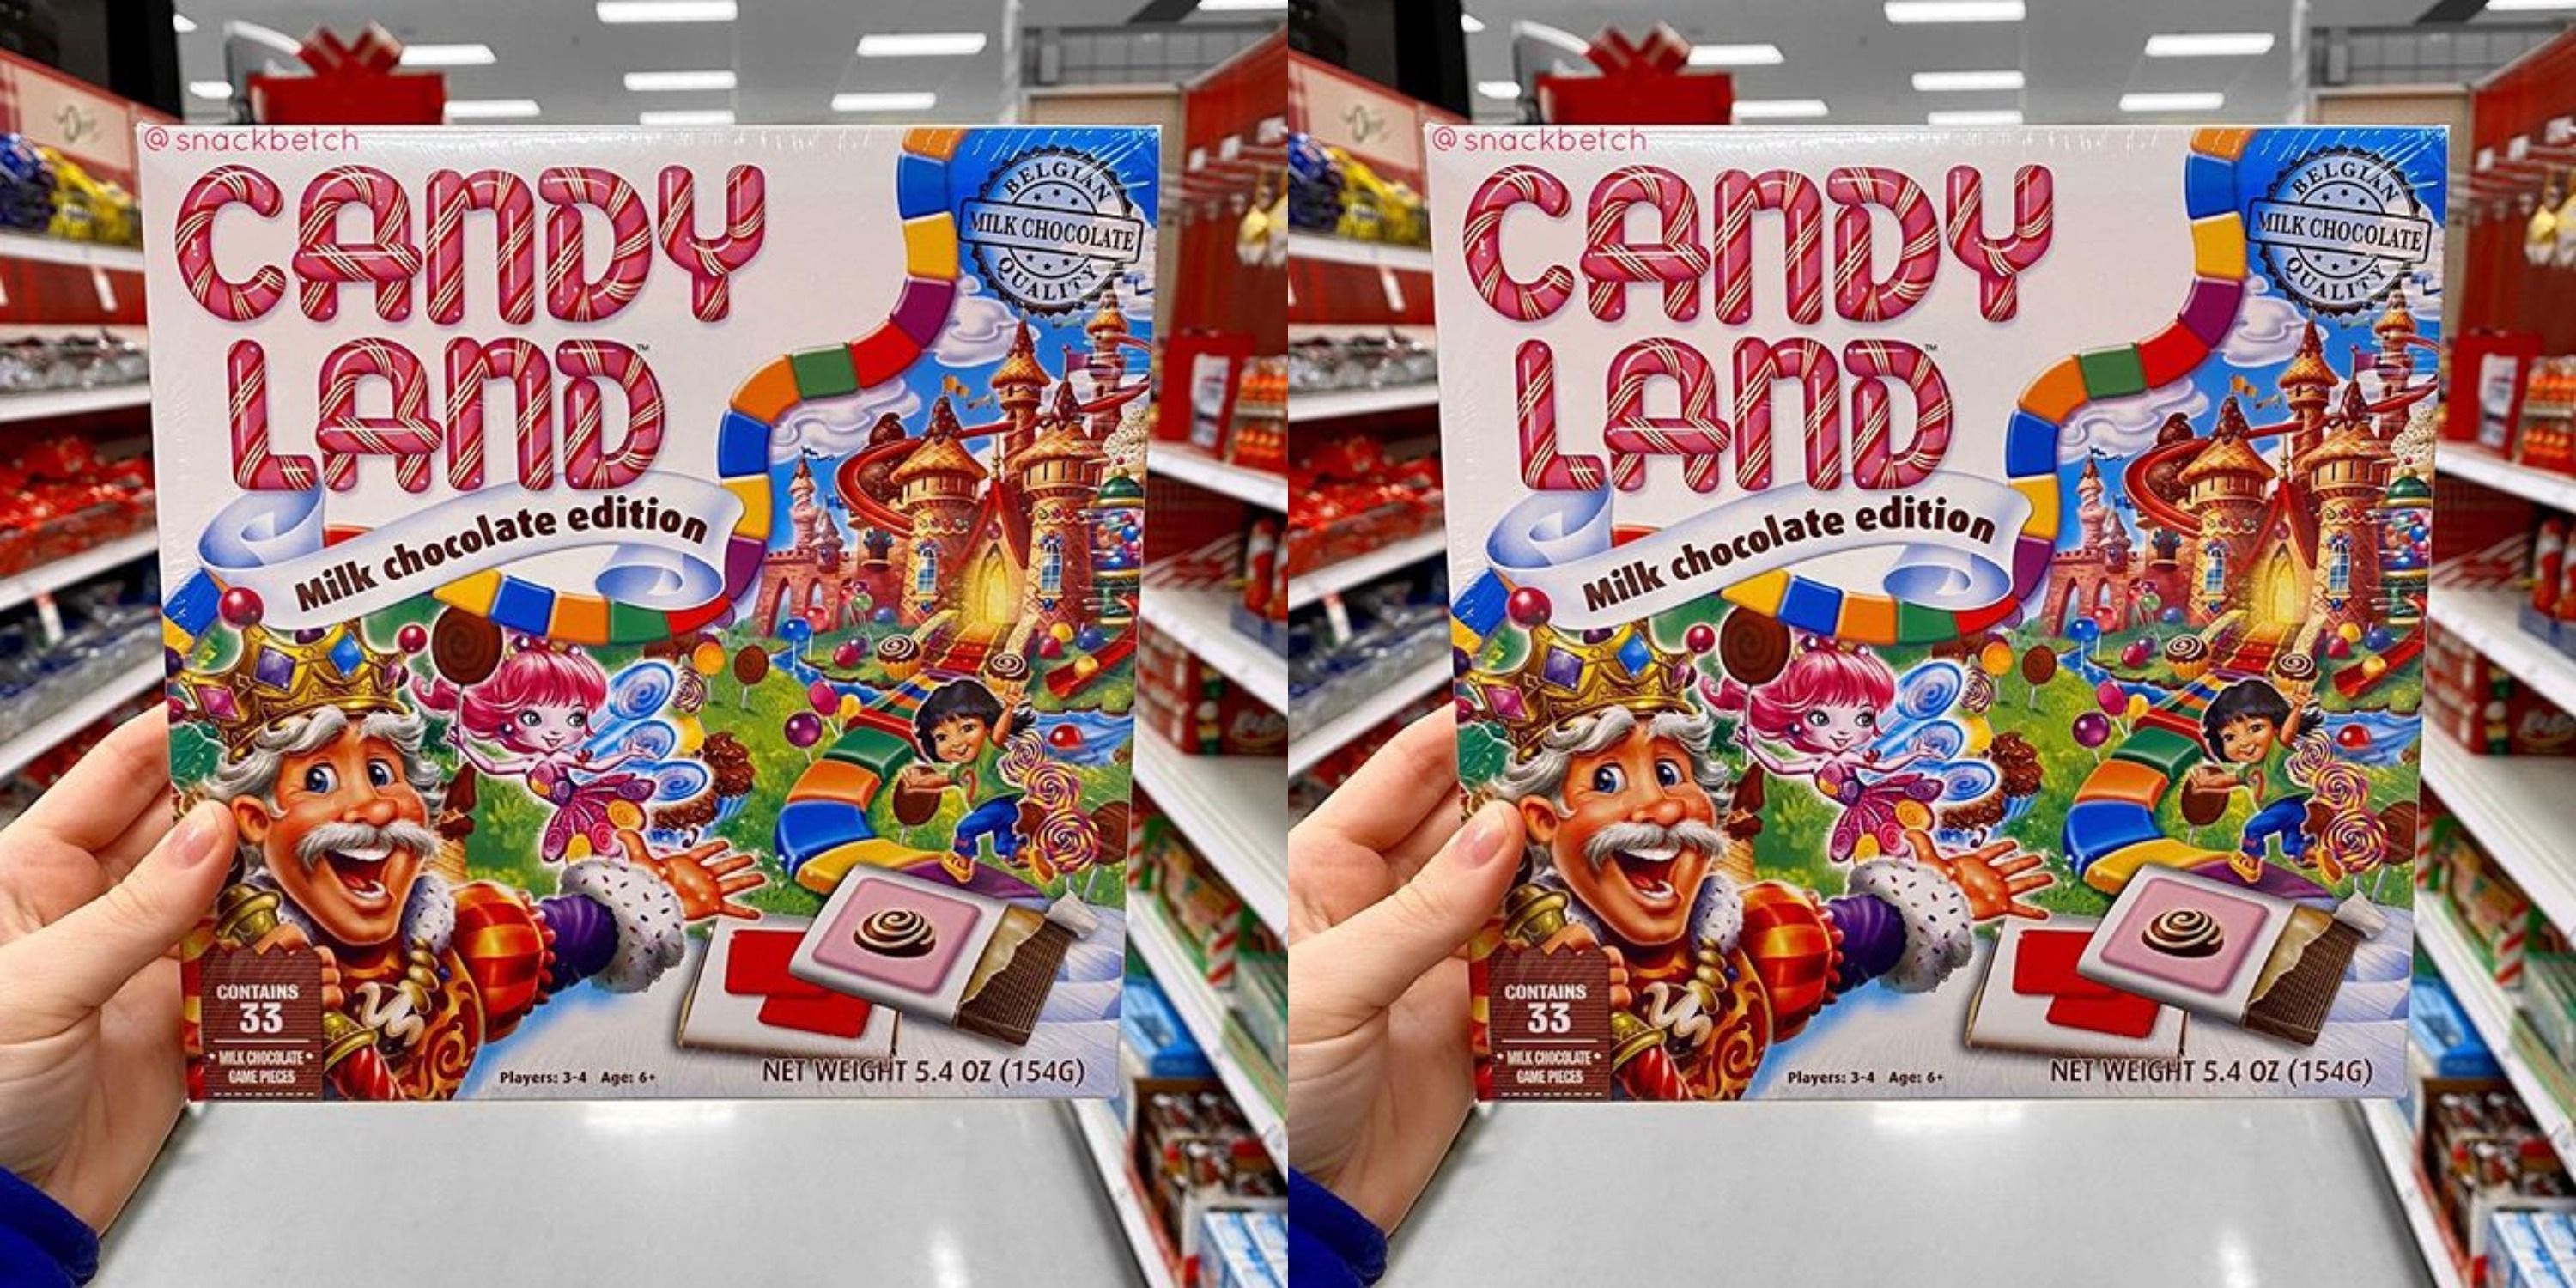 meaning of a dream of im living in the candy land board game